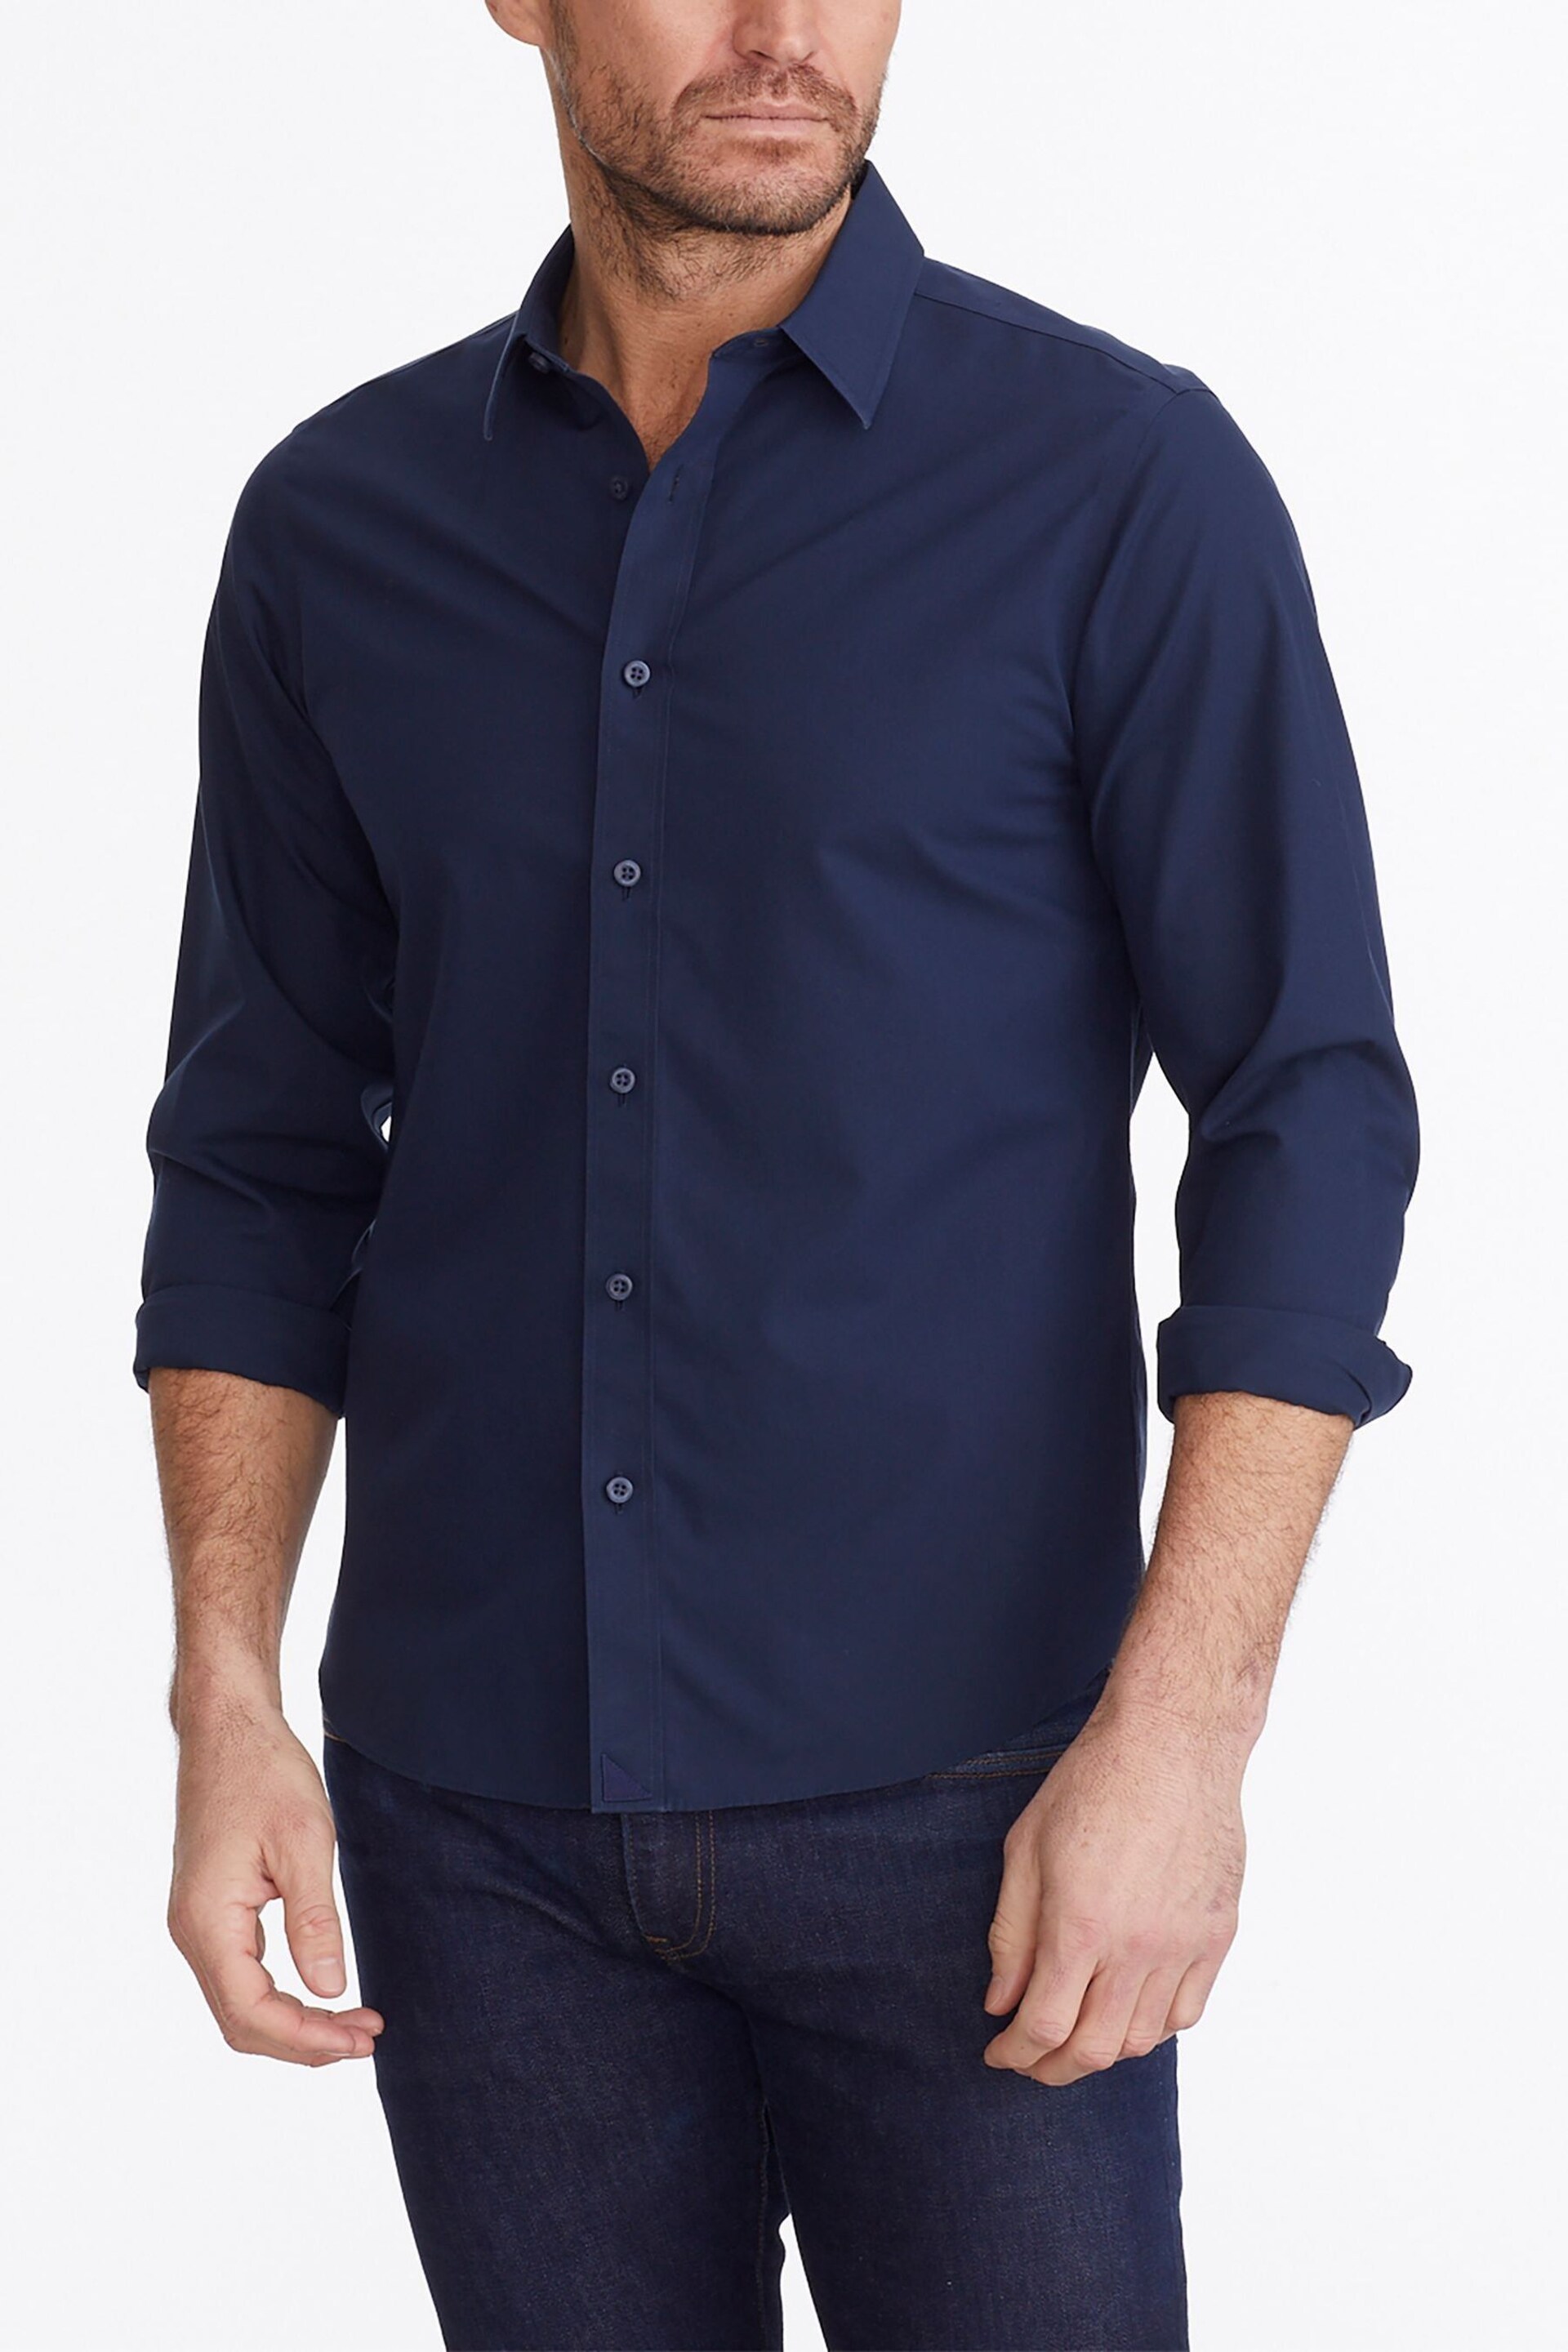 UNTUCKit Navy Wrinkle-Free Relaxed Fit Castello Shirt - Image 4 of 6